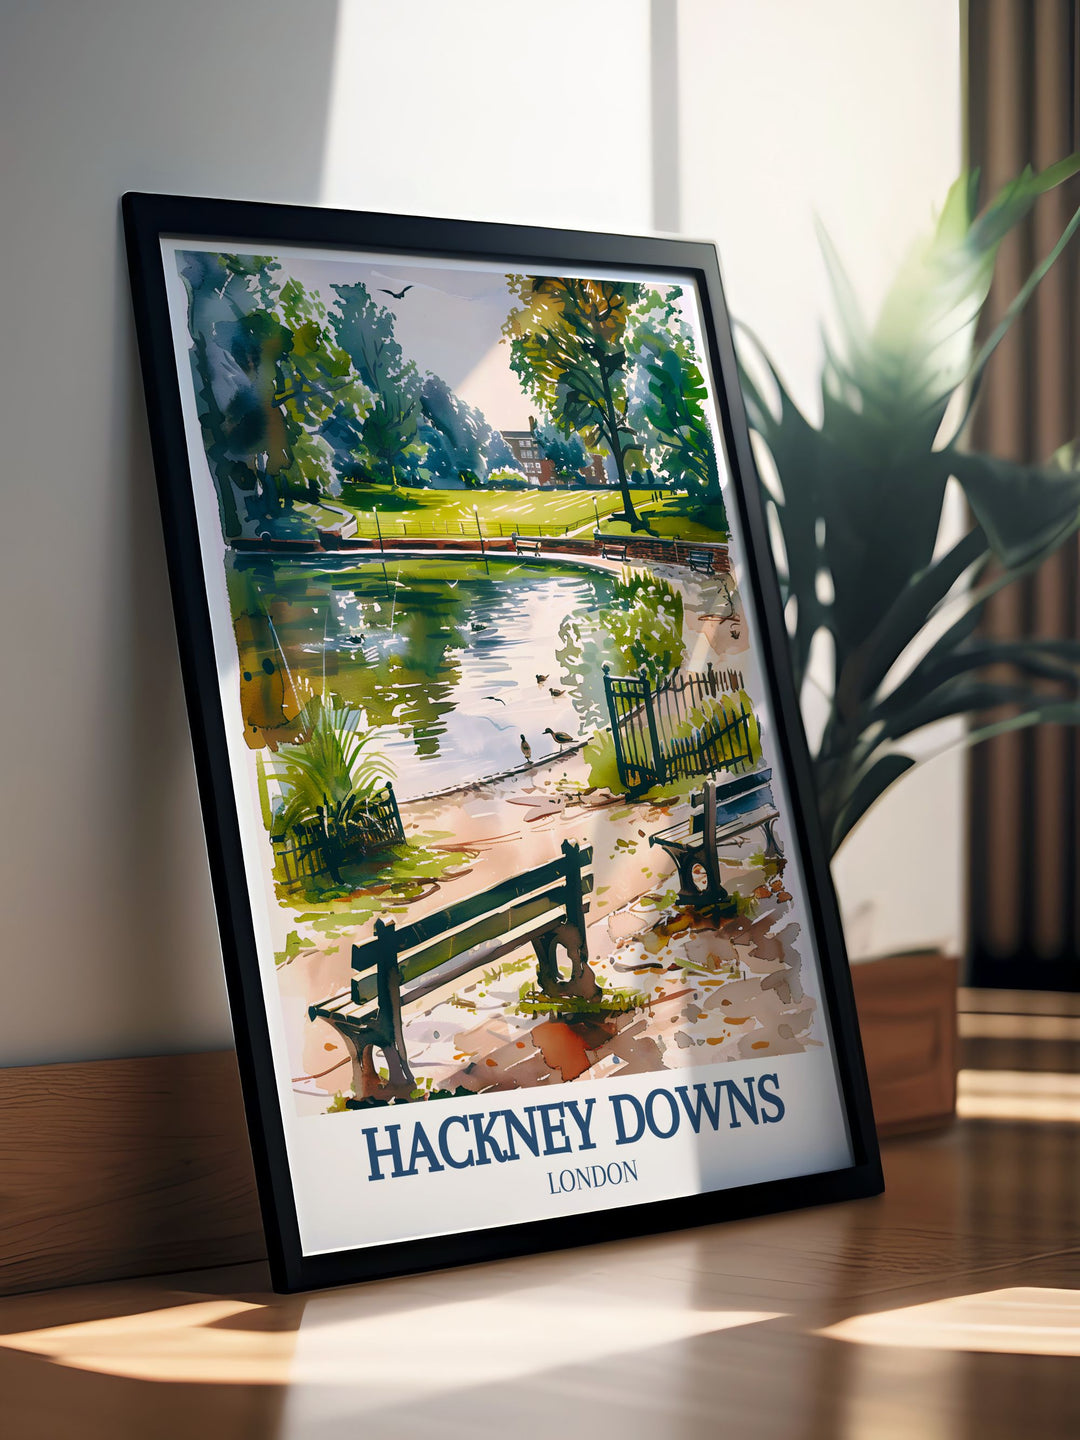 Showcasing the tranquil beauty of Hackney Downs, this travel poster captures the serene and inviting atmosphere of one of Londons cherished parks, bringing a piece of its charm into your home.